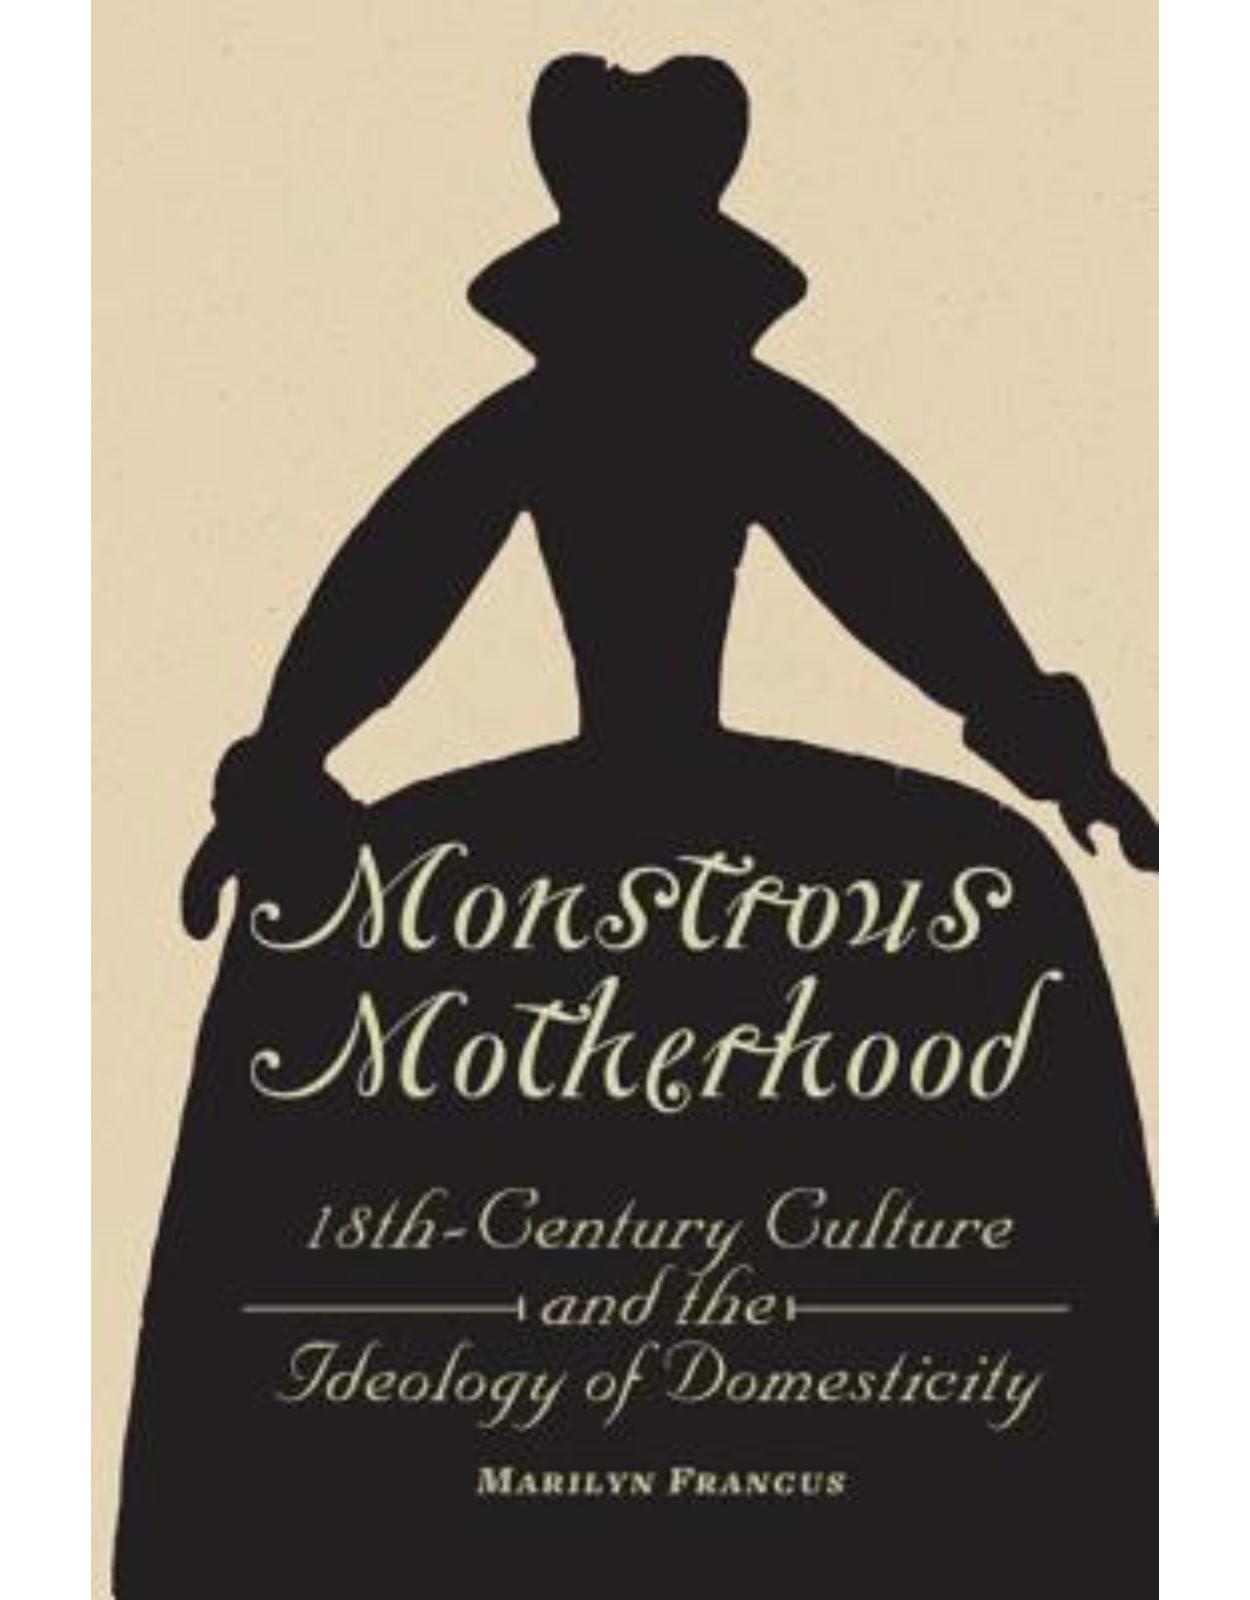 Monstrous Motherhood. Eighteenth-Century Culture and the Ideology of Domesticity